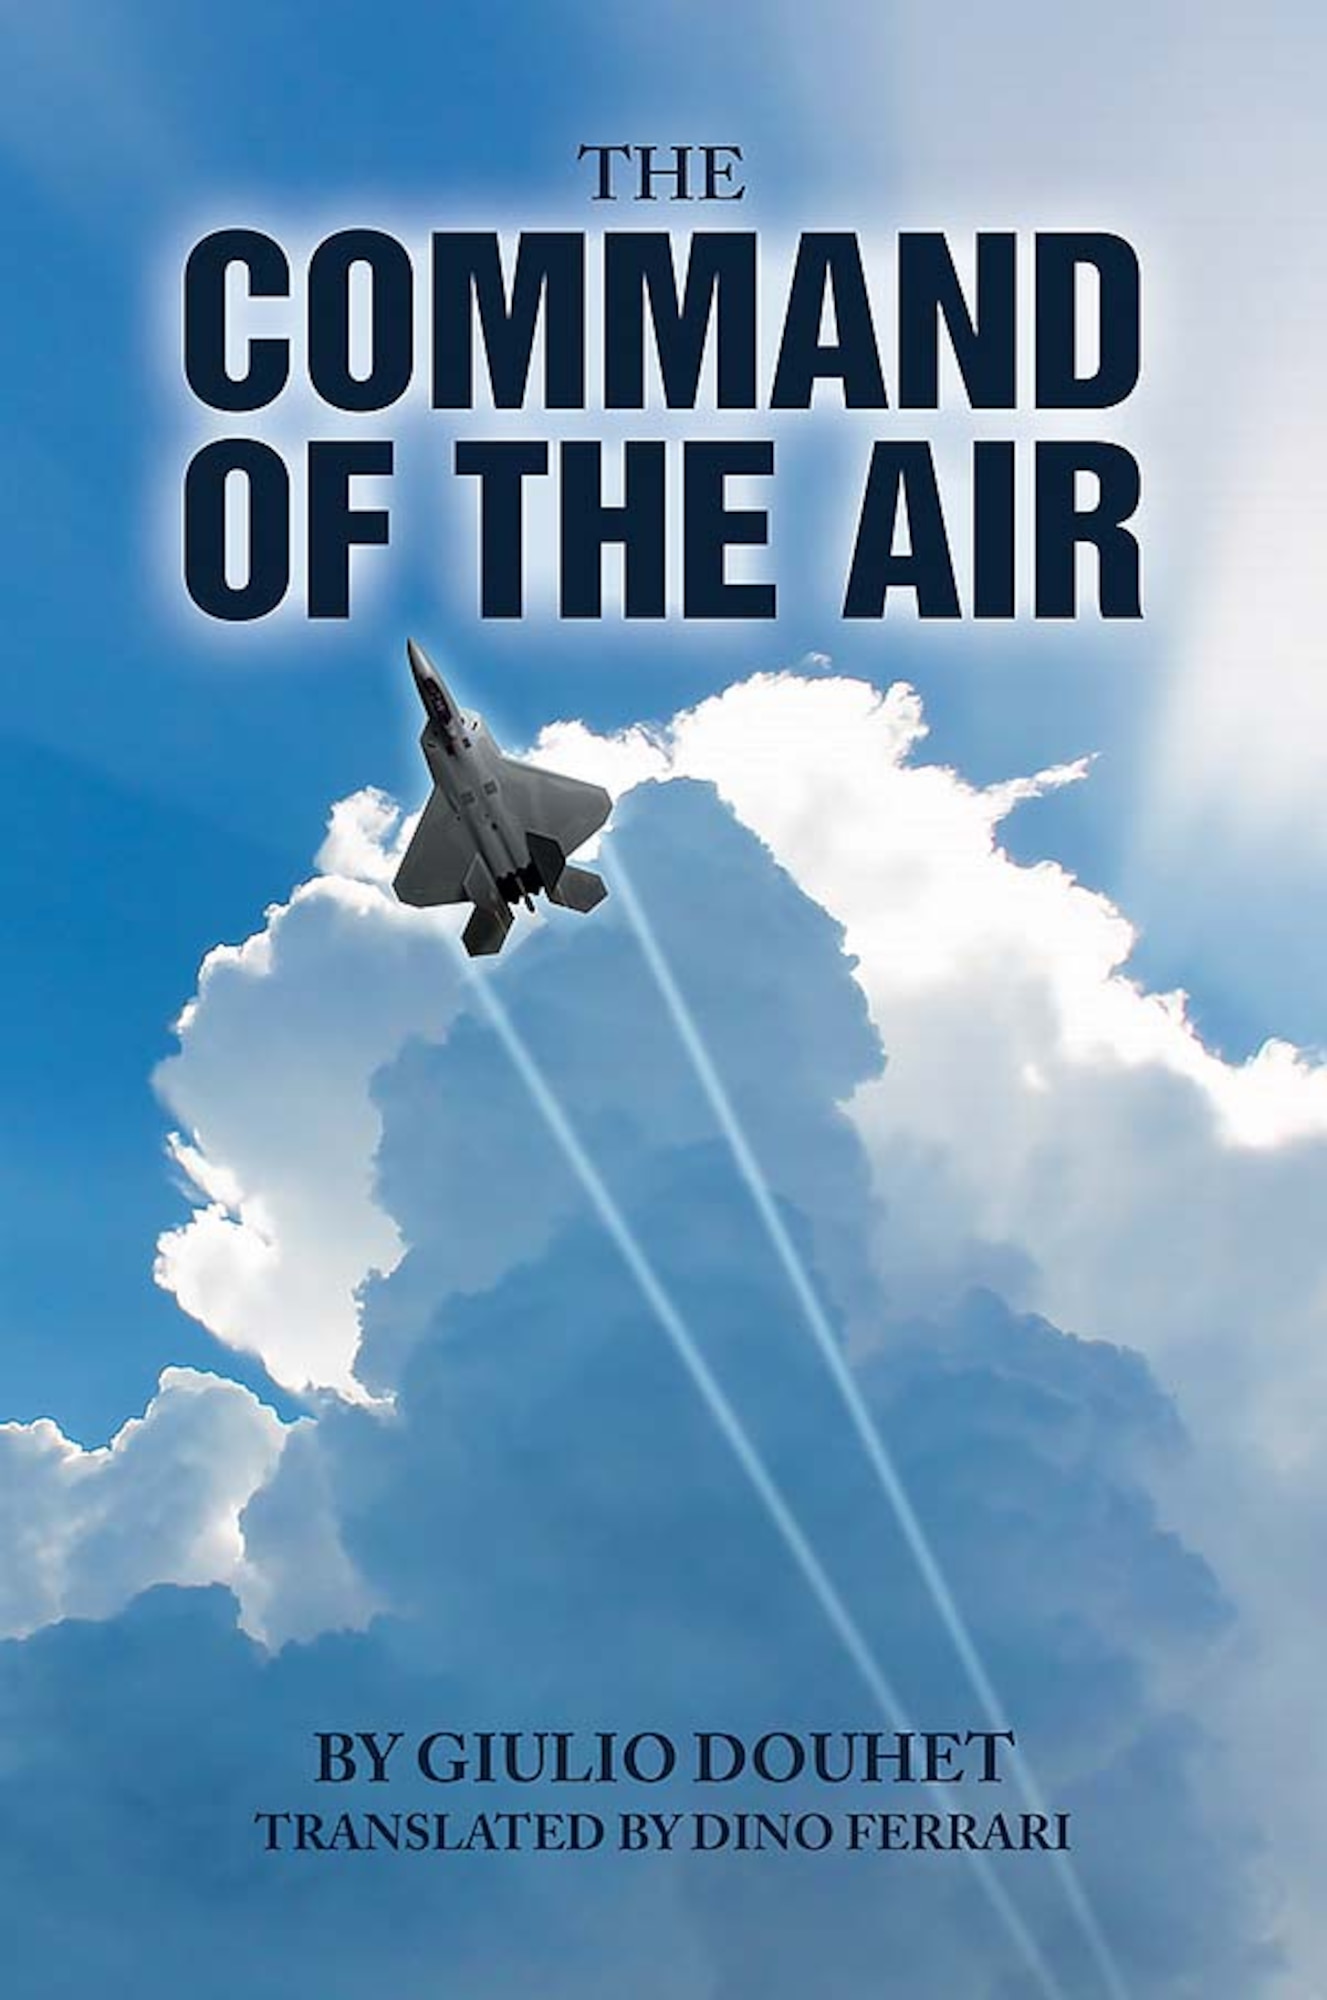 Air University Press releases updated The Command of the Air